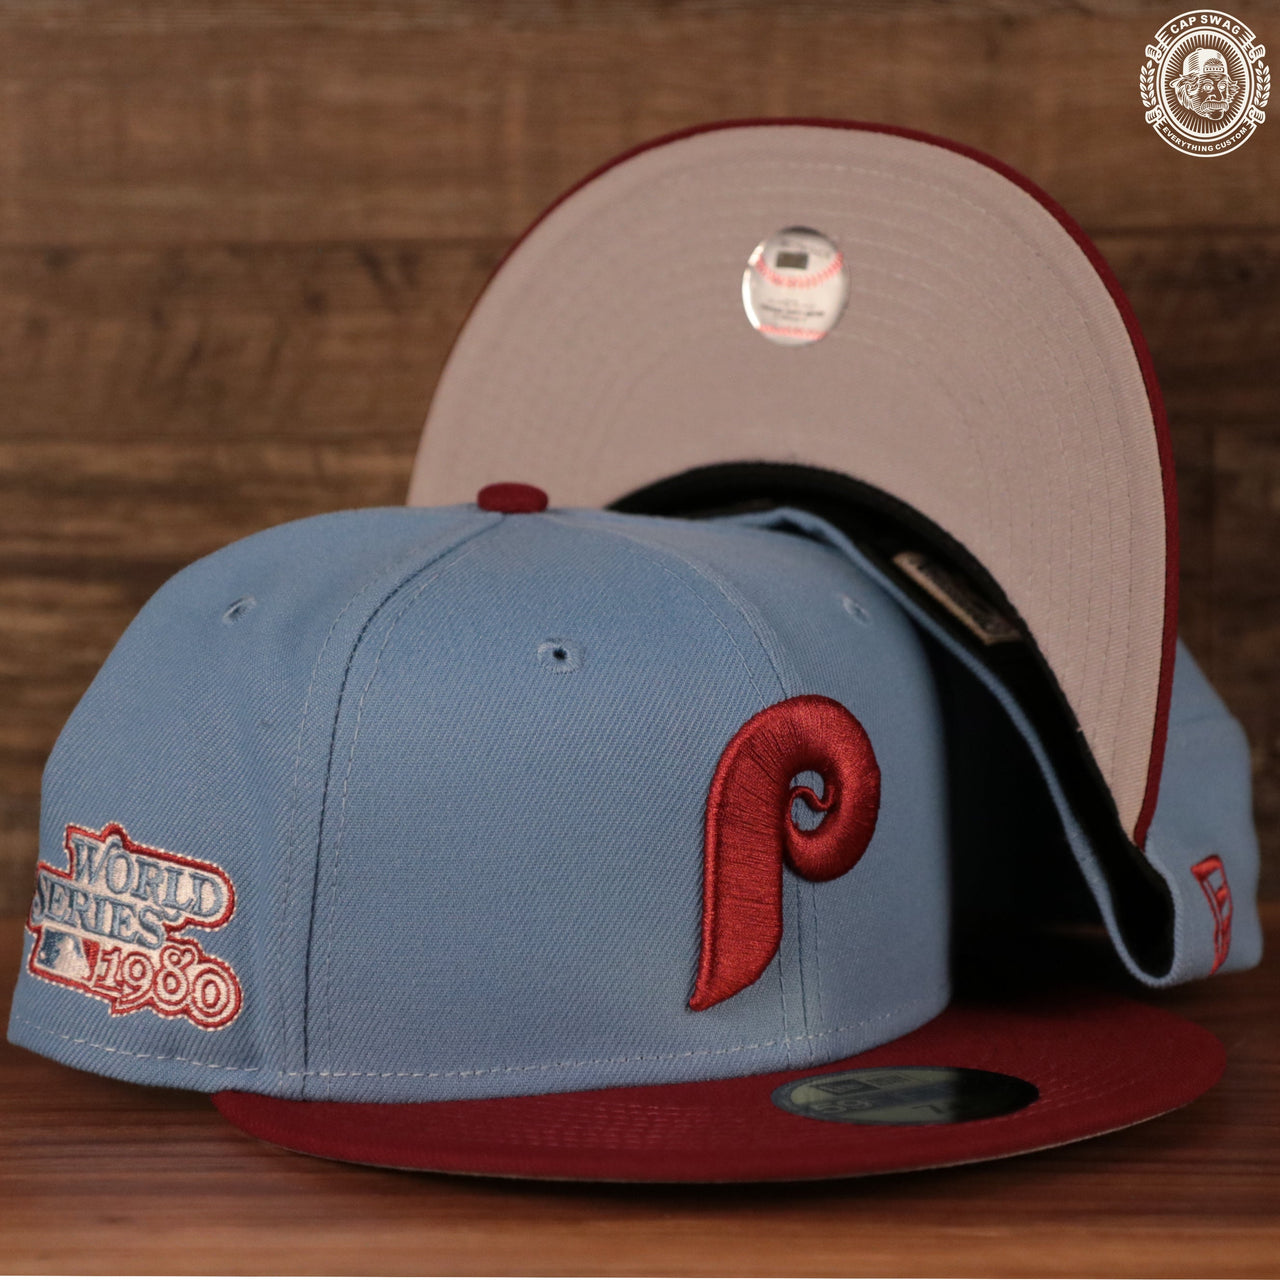 The ice blue/maroon retro Philadelphia Phillies 1980 World Series side patch fitted Gray Bottom hat by New Era.